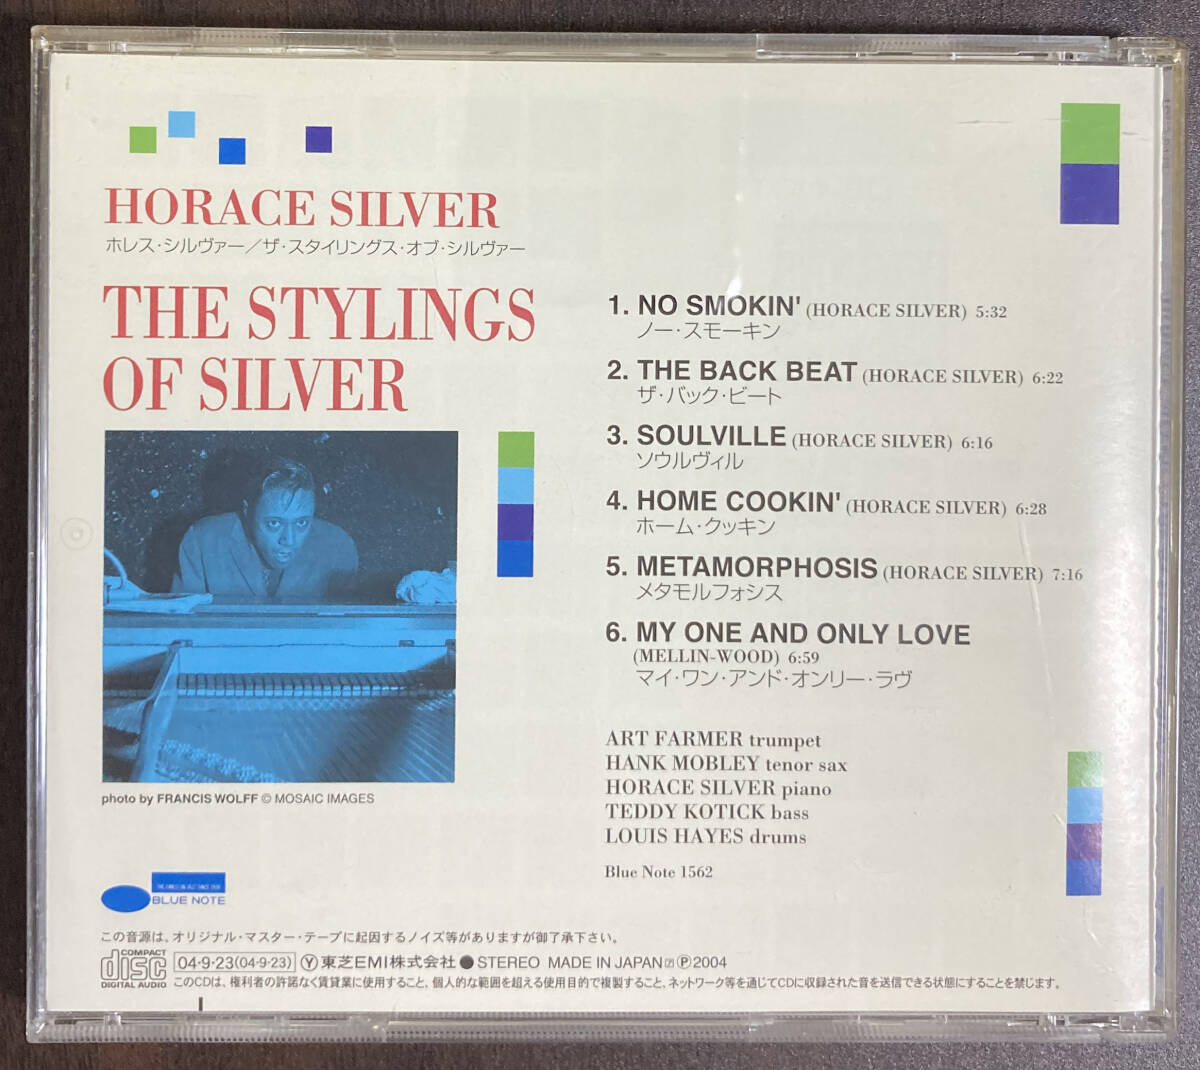 Horace Silver / The Stylings of Silver 中古CD　国内盤　帯付き 24bitデジタルリマスタリング　限定盤　BLUE NOTE _画像3